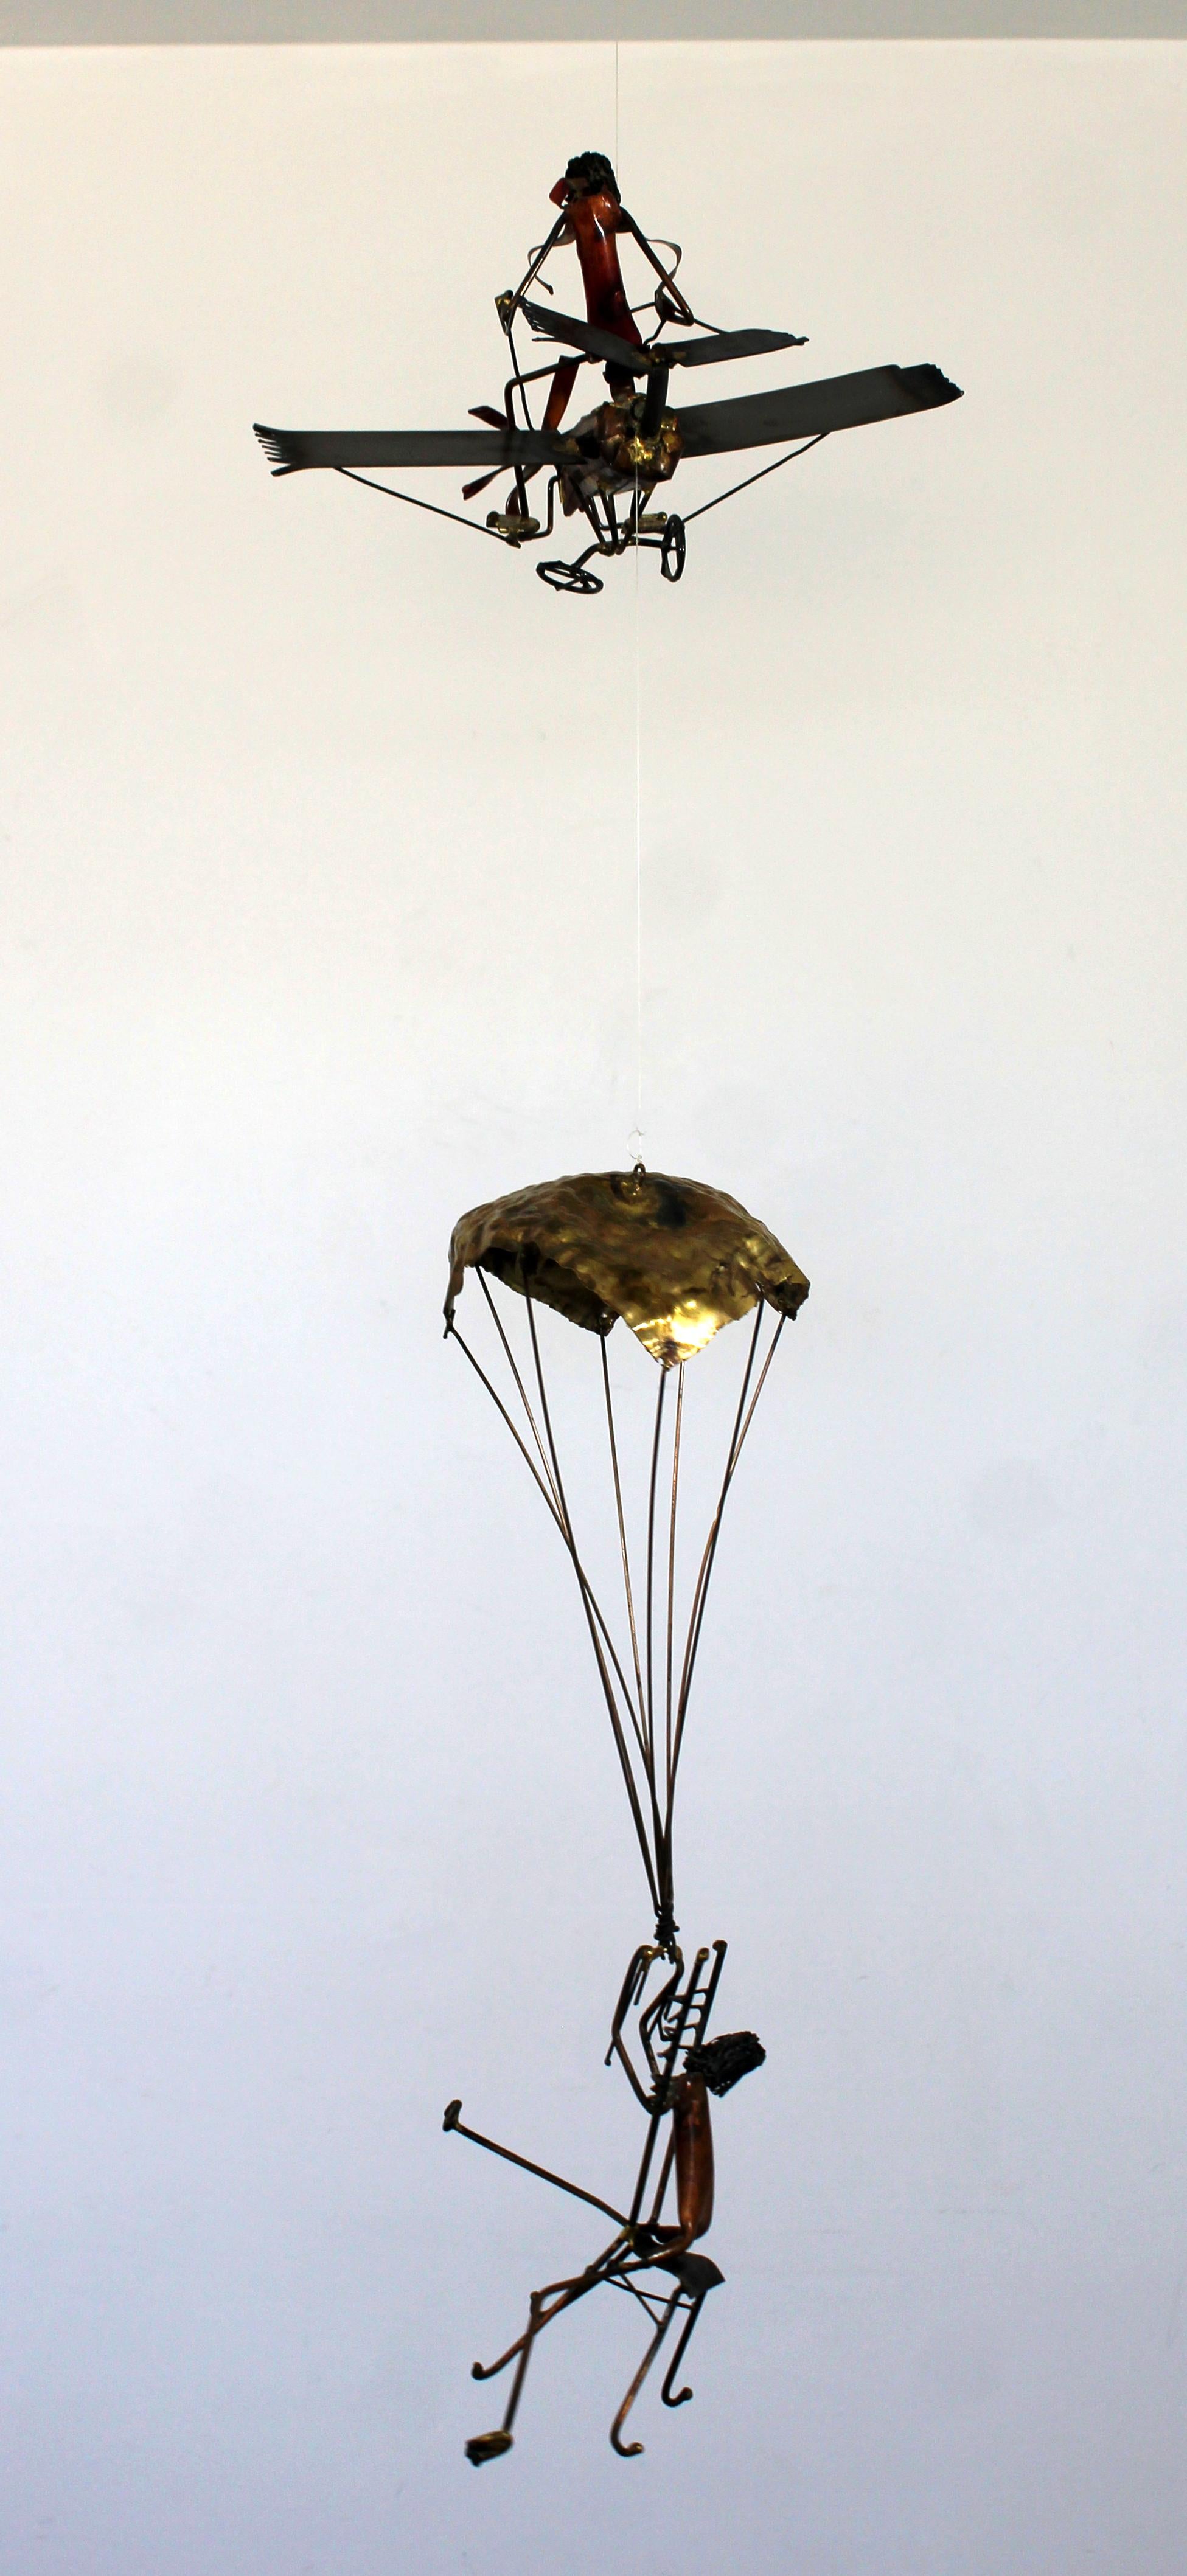 Late 20th Century Mid-Century Modern Brutalist Brass Hanging Sculpture 1970s Plane and Parachute